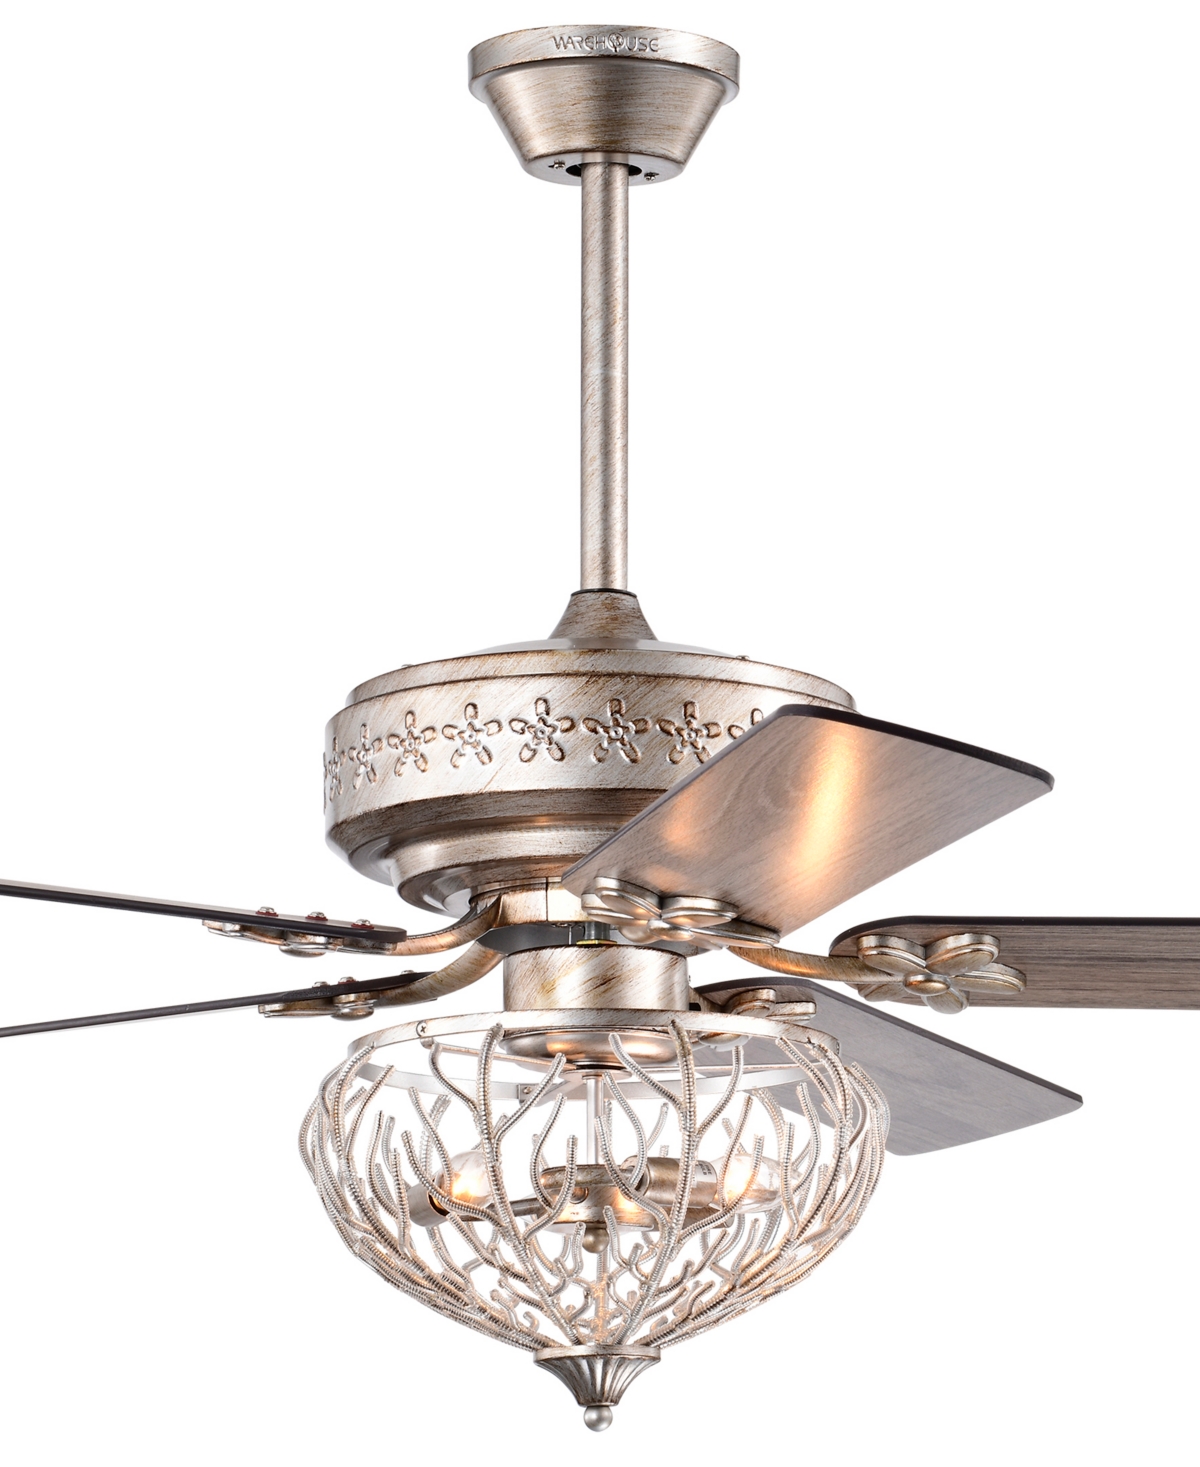 Home Accessories Kannon 52" 3-light Indoor Ceiling Fan With Light Kit In Antique Silver